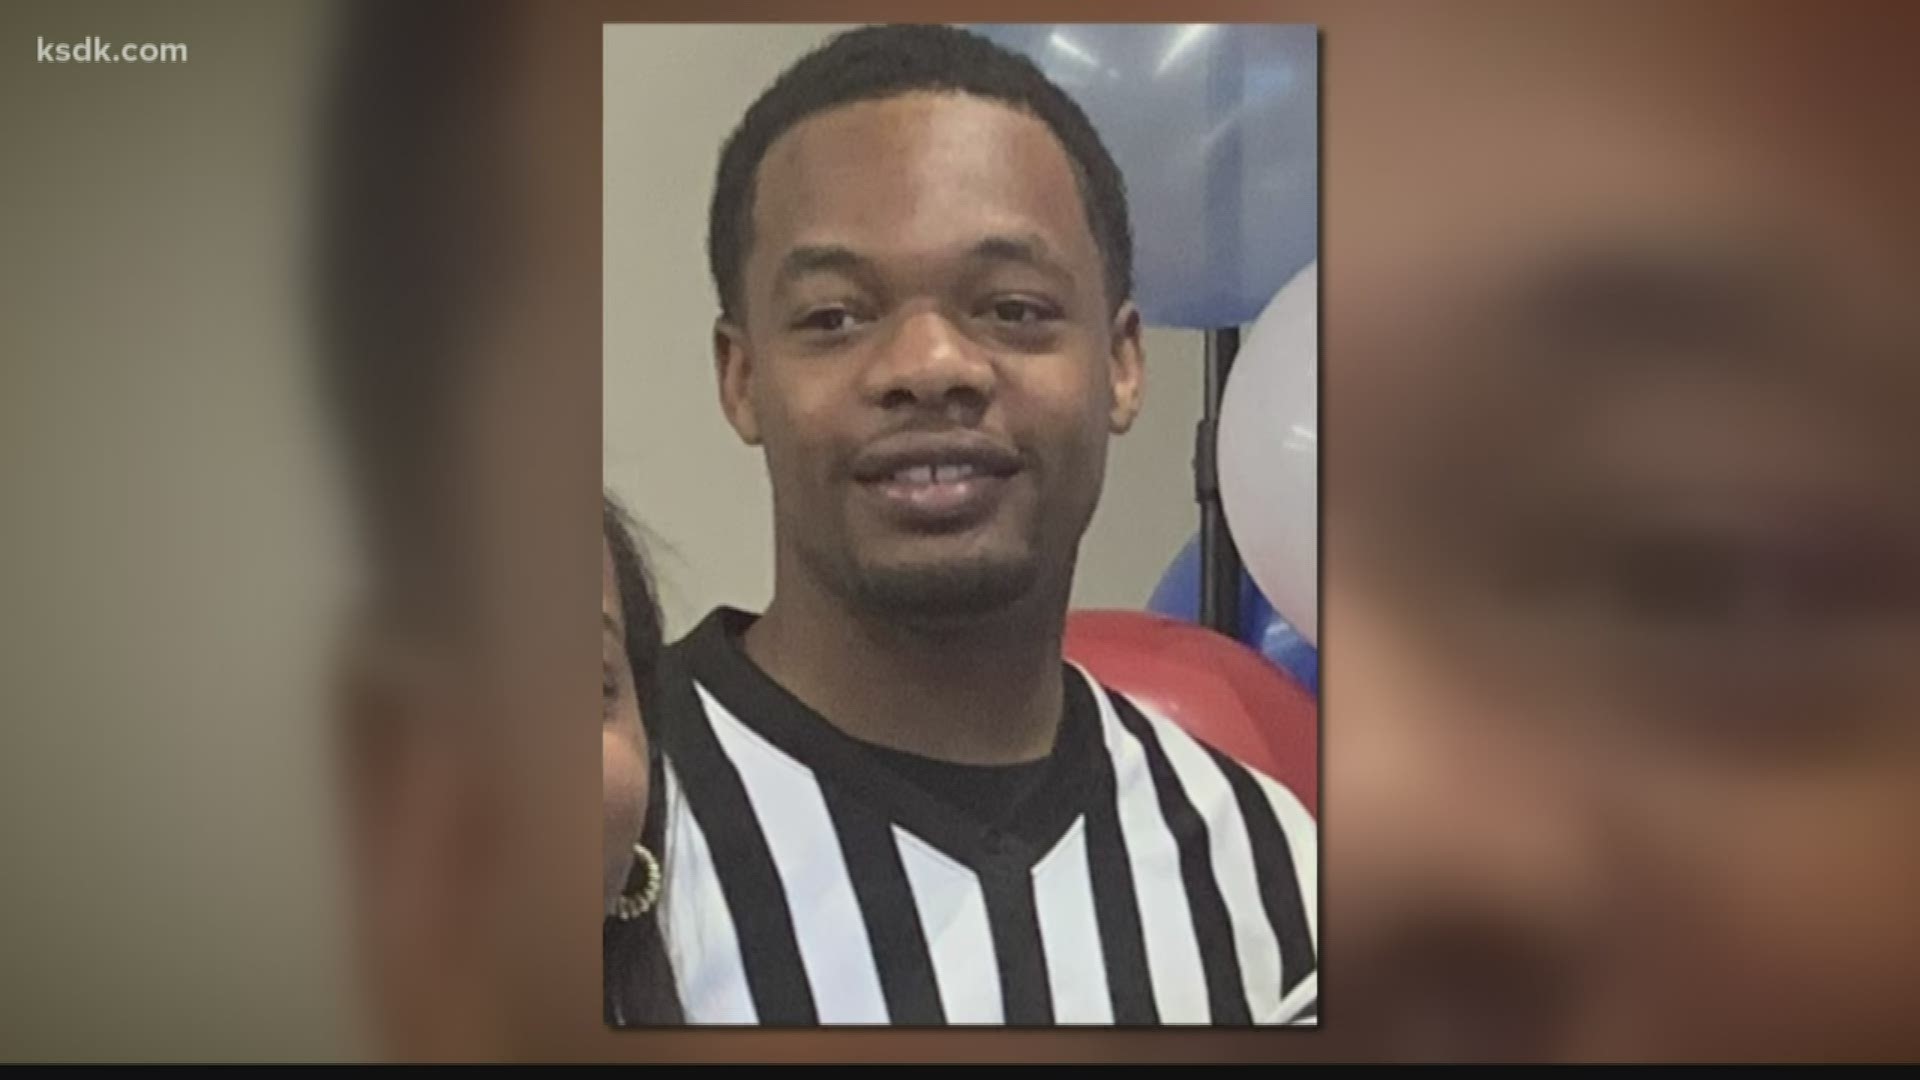 Cortez Bufford was shot and killed by an officer Thursday after police say Bufford pulled out a gun and refused to drop it